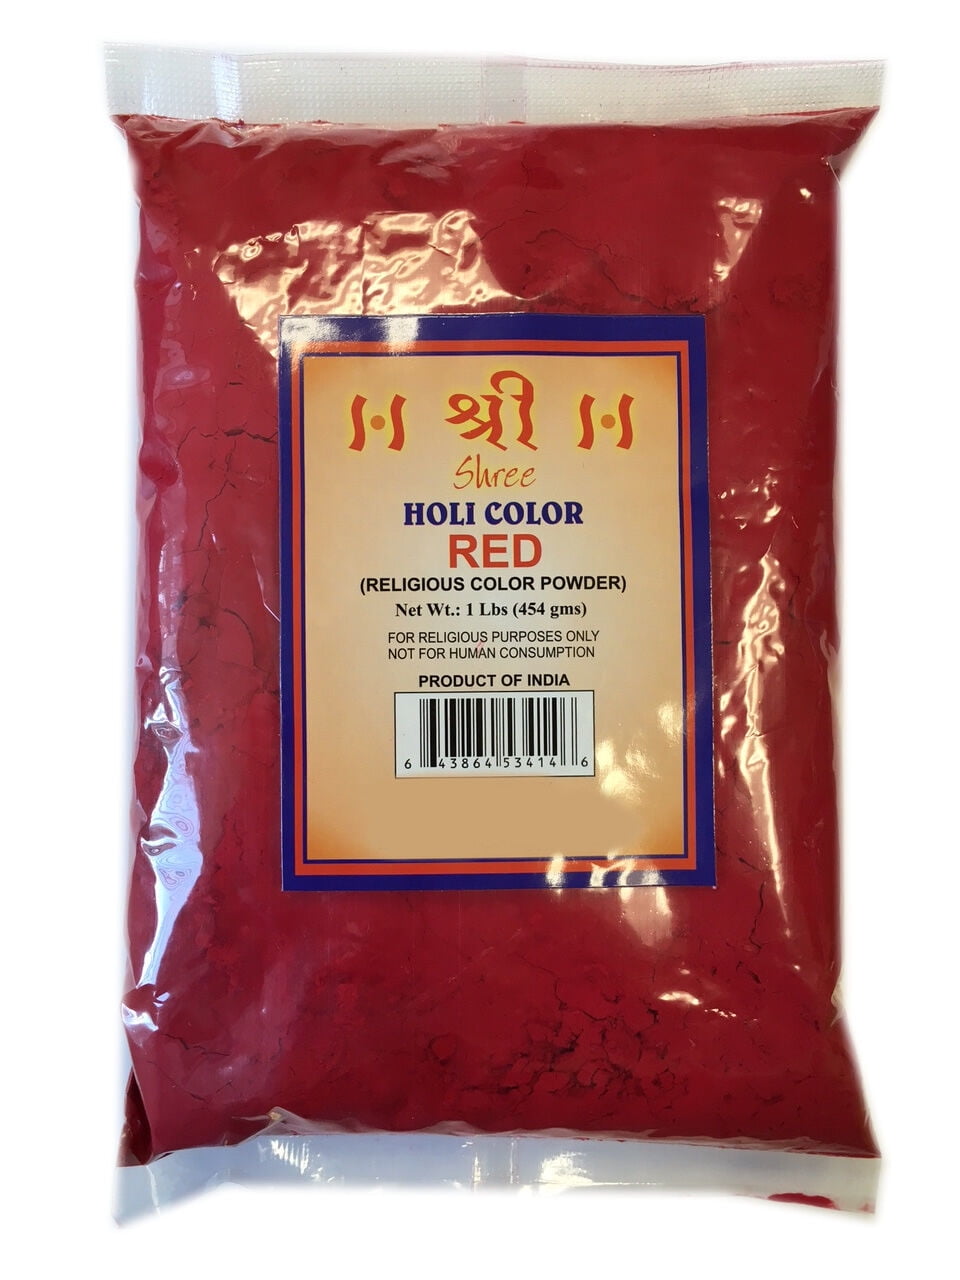  Gulal Holi Powder-Gulal Colour Powder - Pack of 5, 100g  Each,Color Powder Festival Colors : Arts, Crafts & Sewing